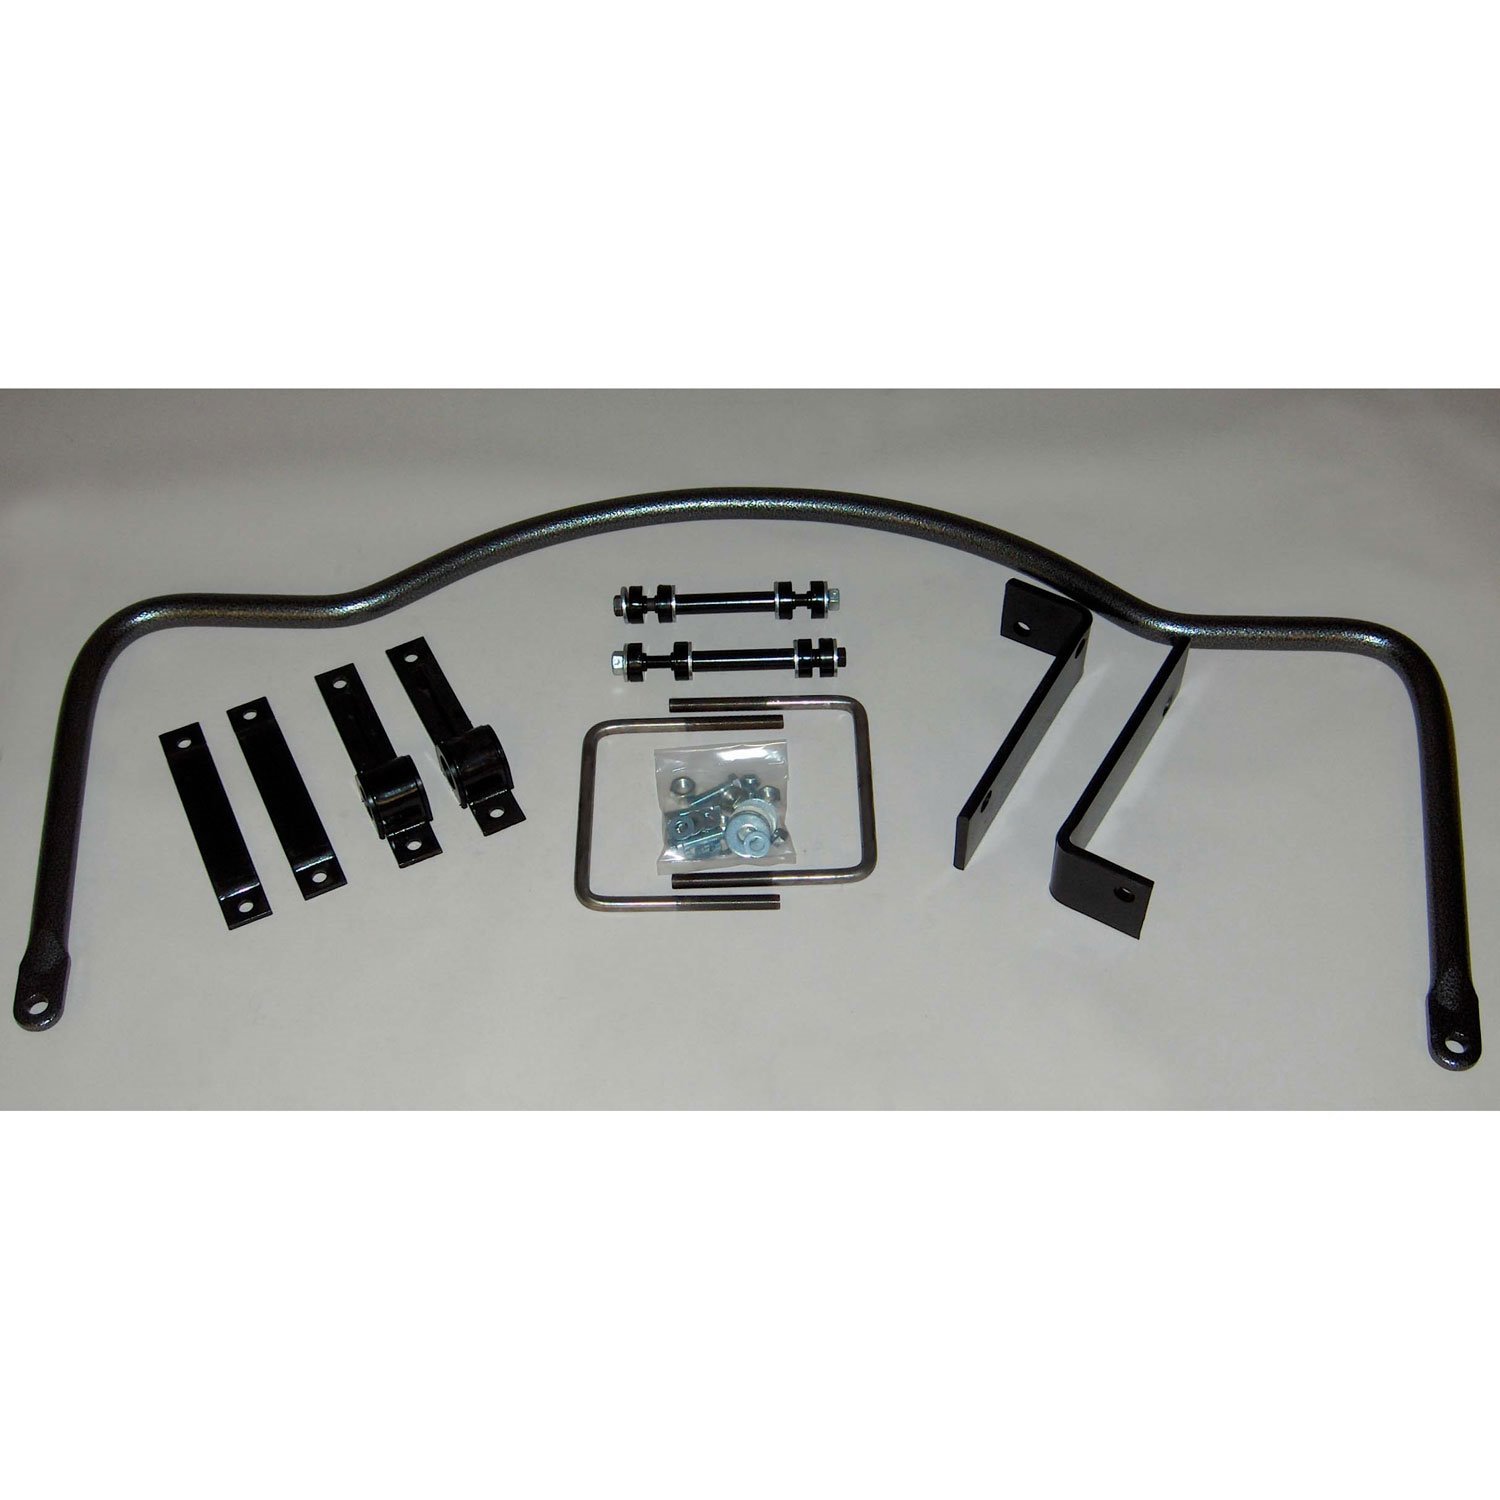 Rear Sway Bar for 1997-2014 Chevy Express and GMC Savana 1500 Vans